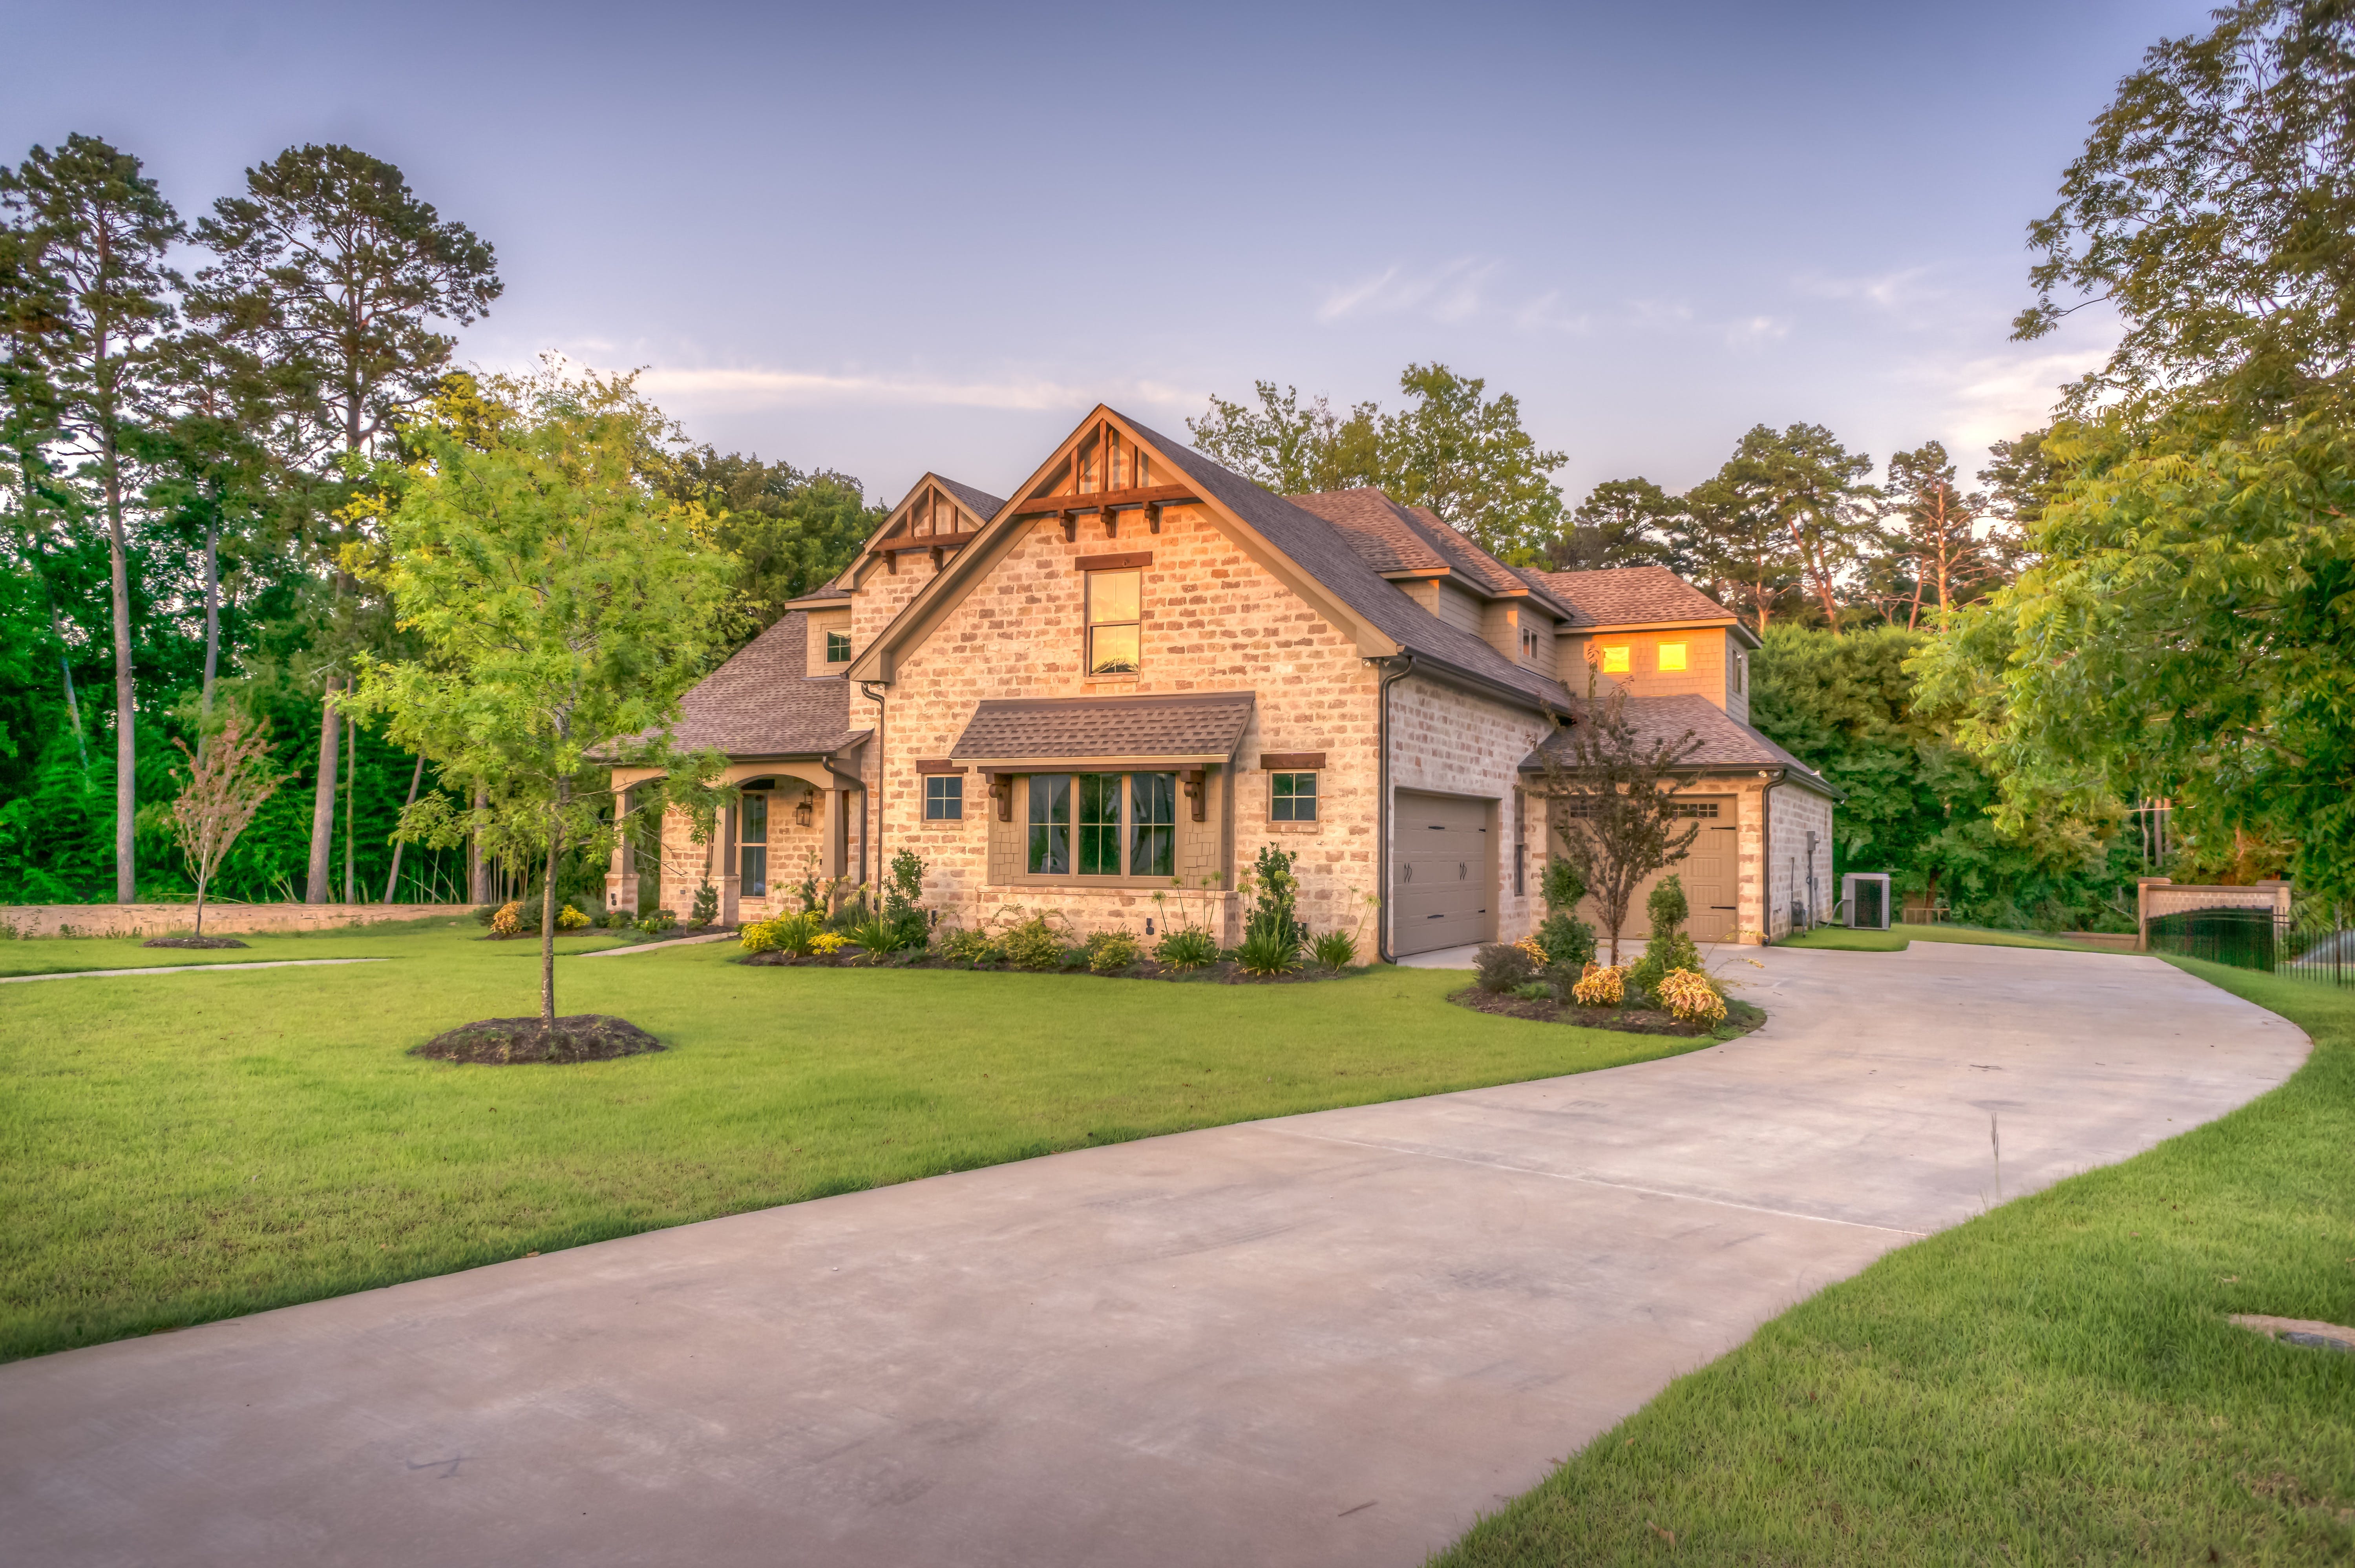 5 reasons why flagstone walkways boost the curb appeal of your home